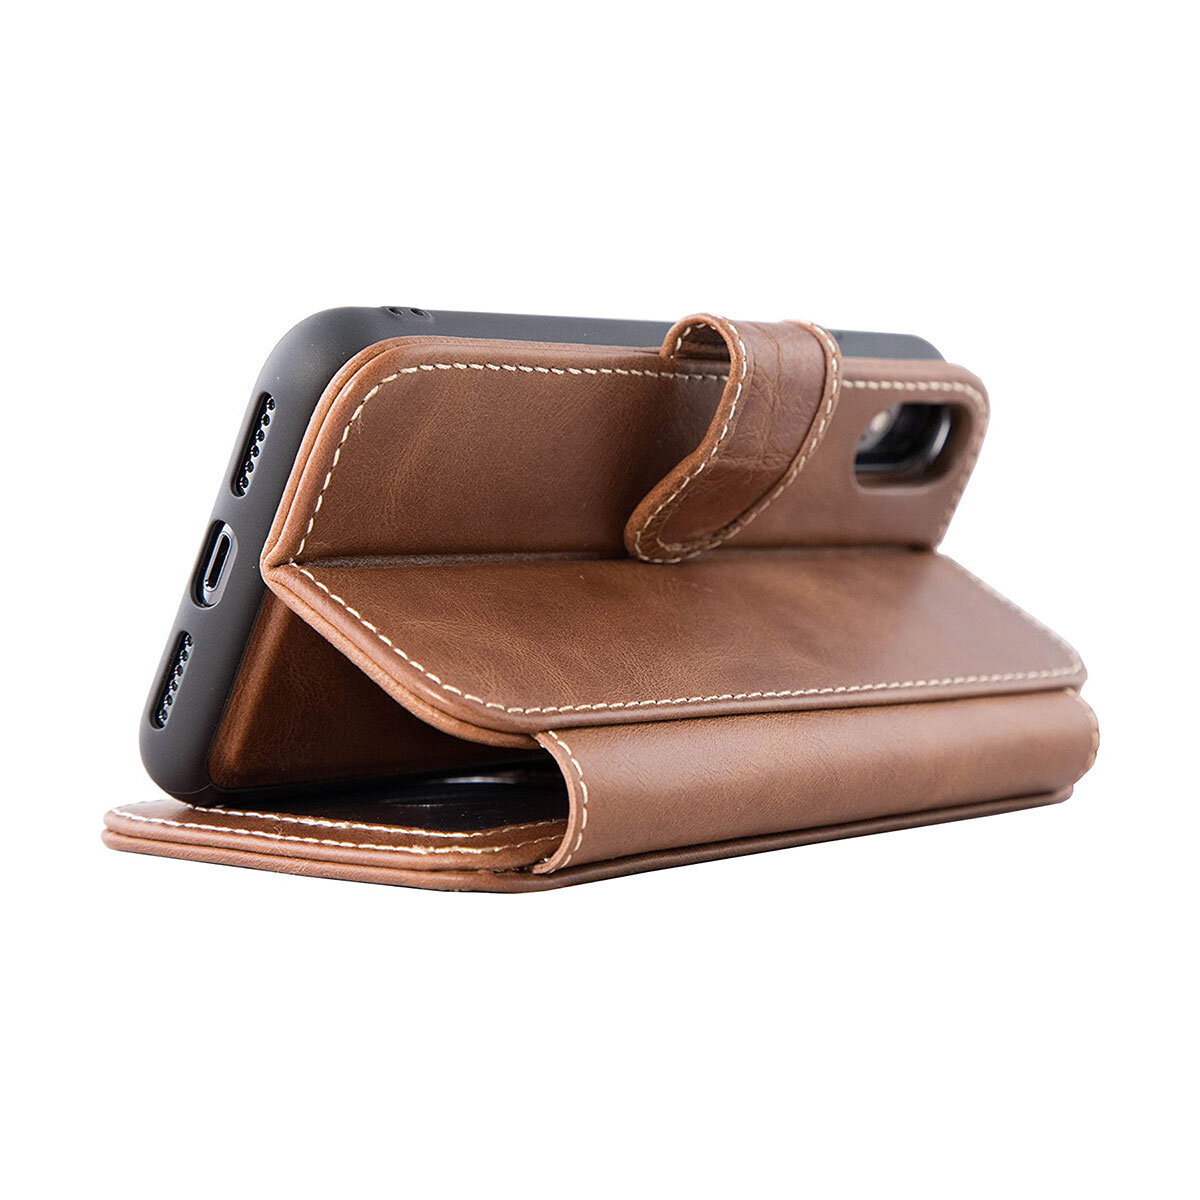  Wilken Genuine Leather iPhone Crossbody Wallet and Purse Phone  Case, Includes a Wristlet and Shoulder Strap